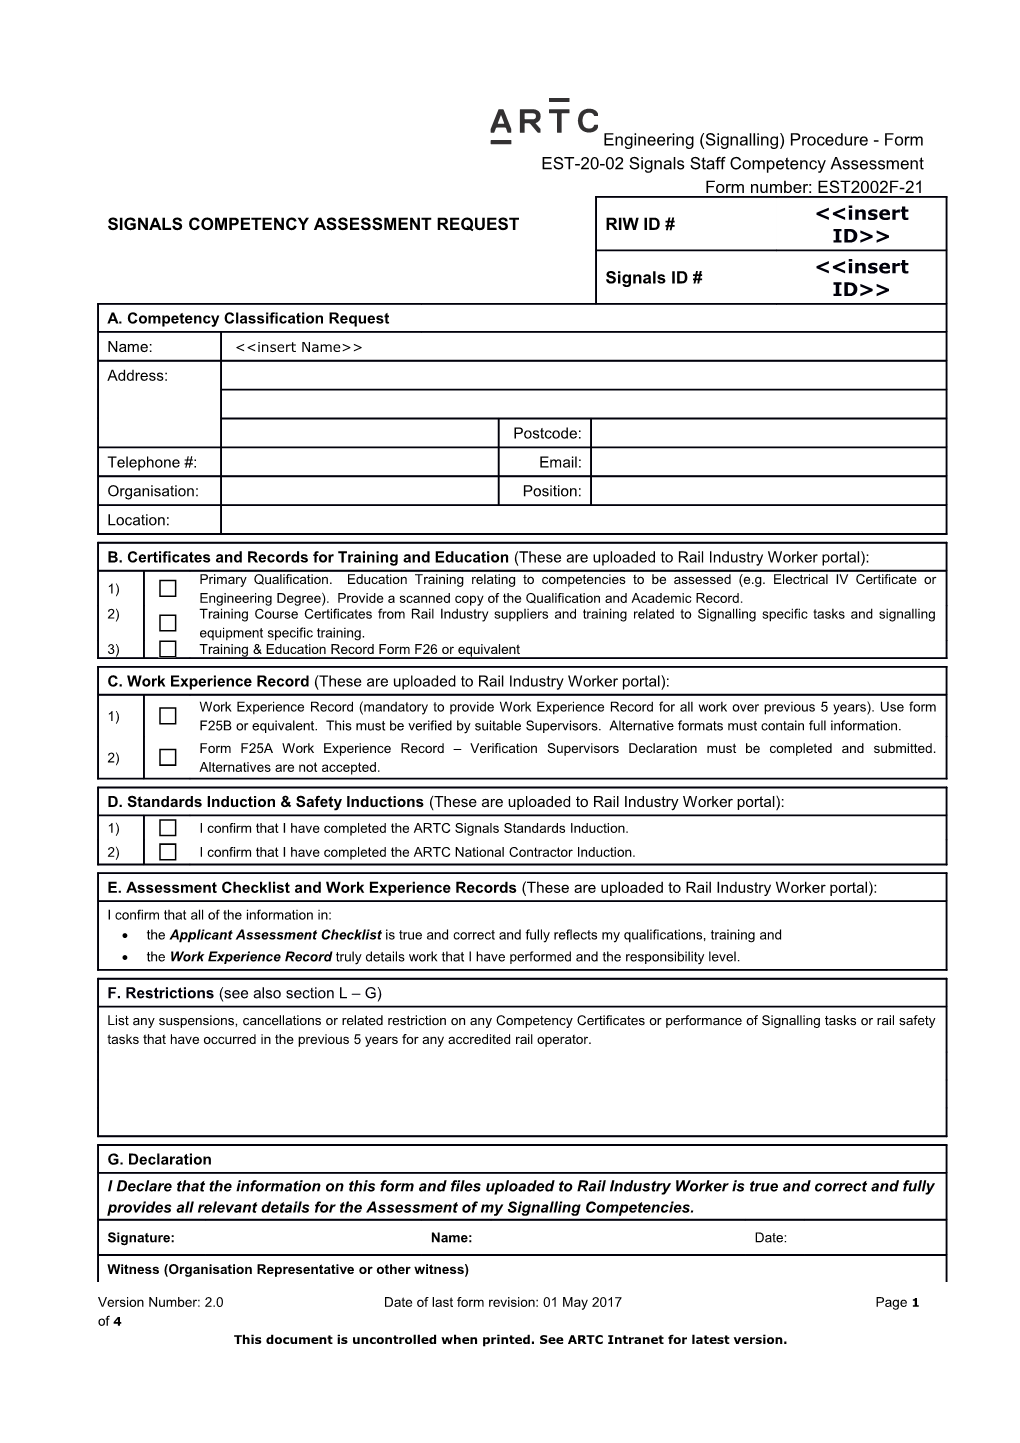 ARTC Corporate Policy and Procedure Template s1